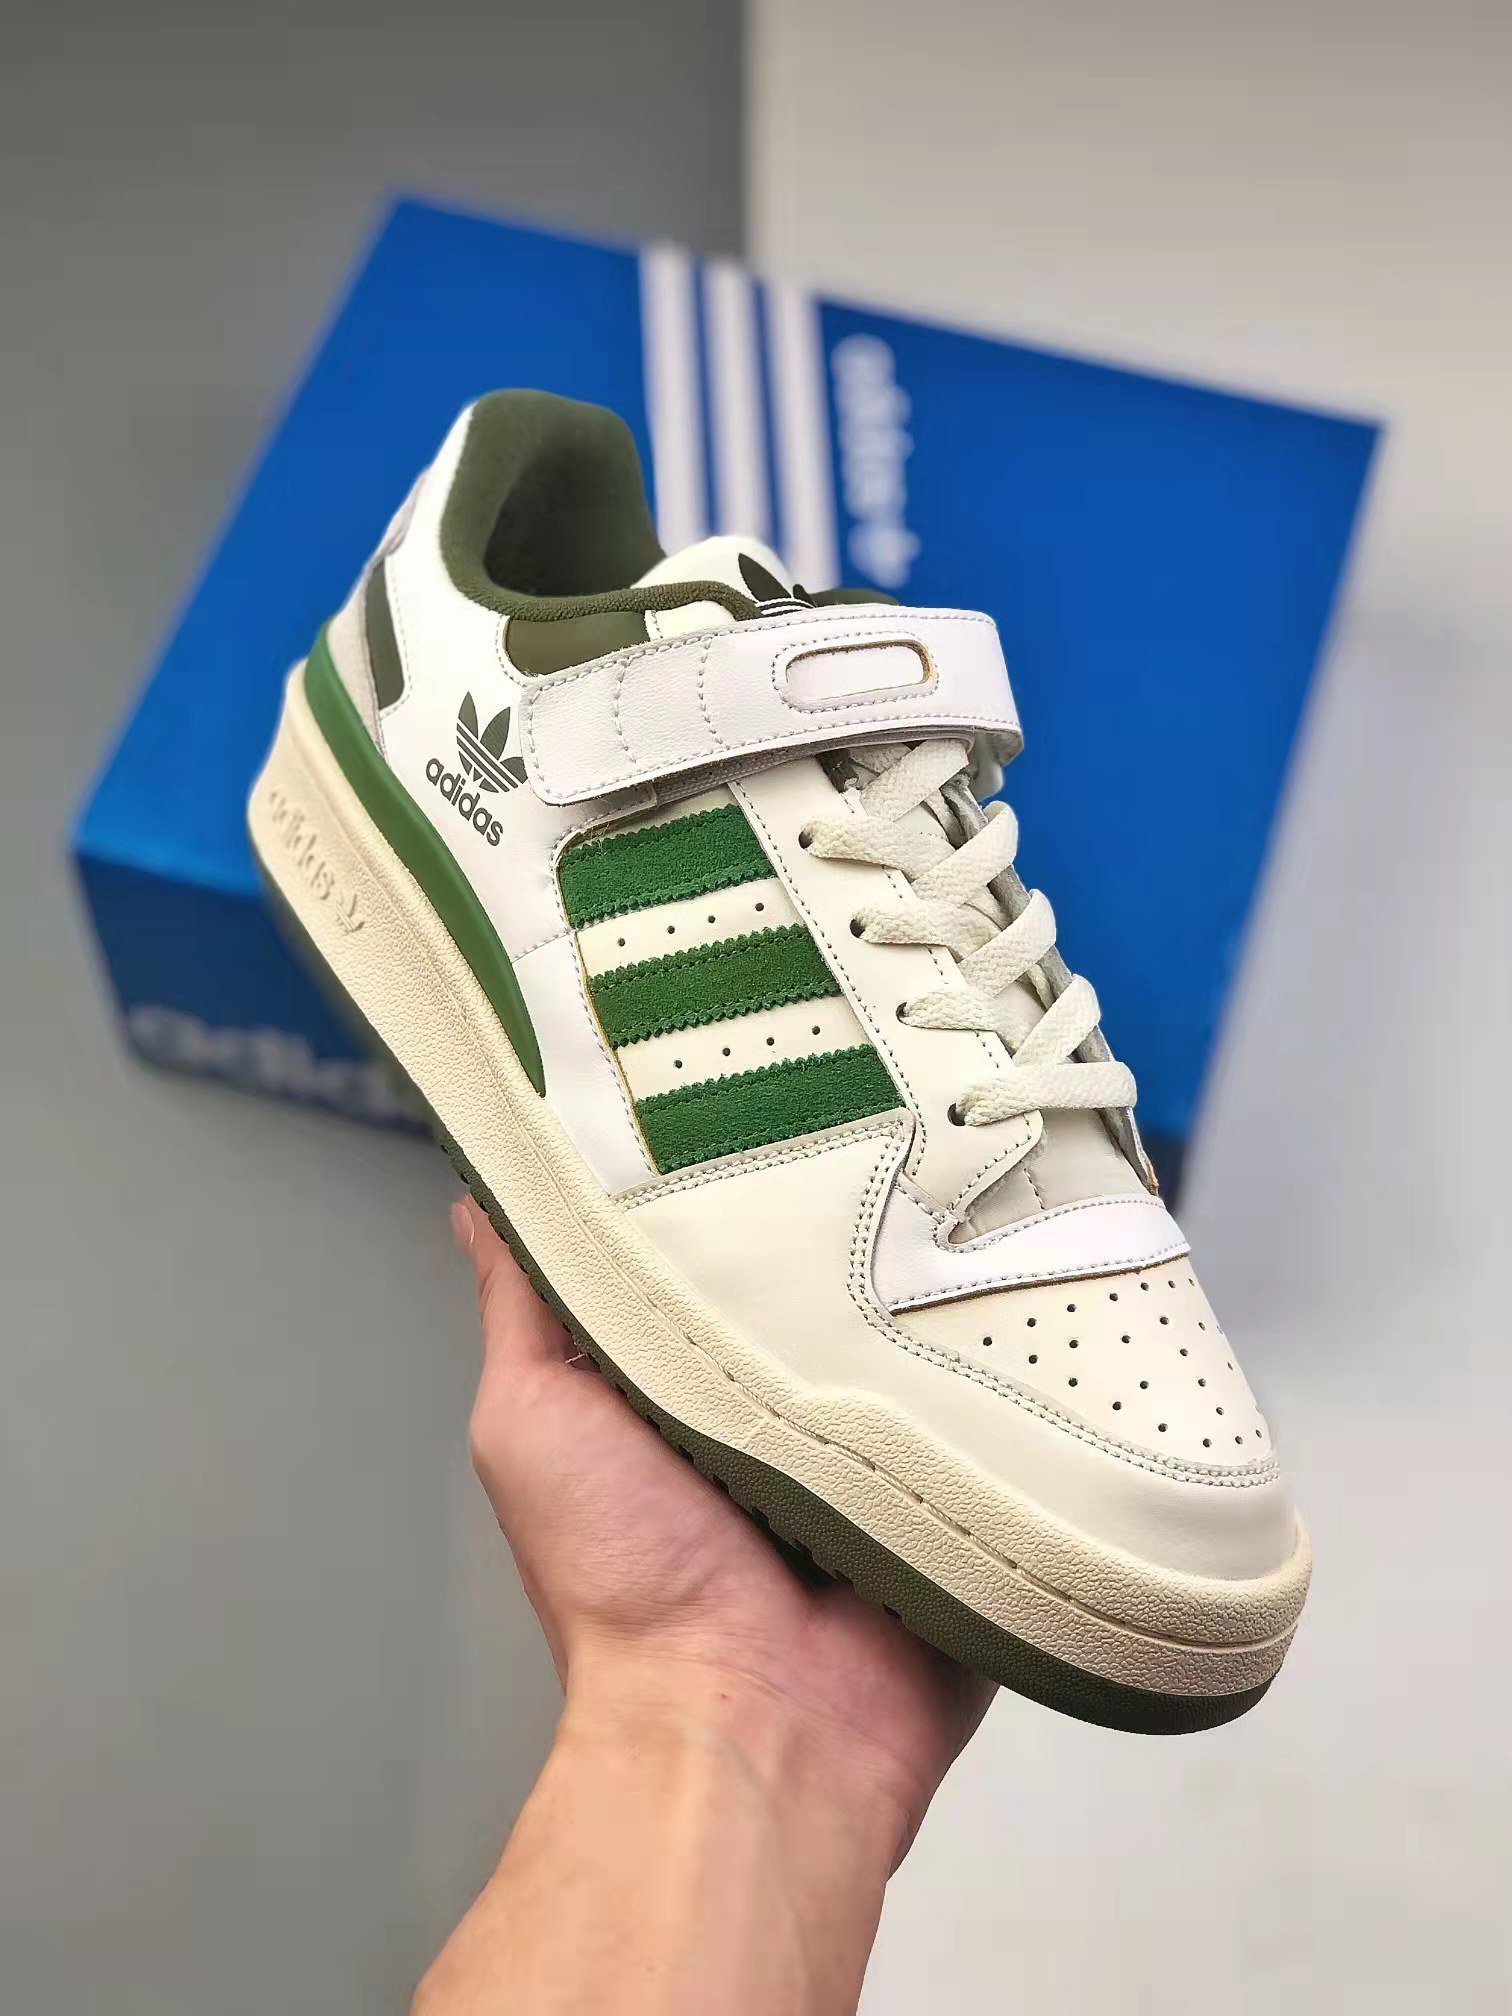 Adidas Forum 84 Low 'White Crew Green' Sneakers - FY8683